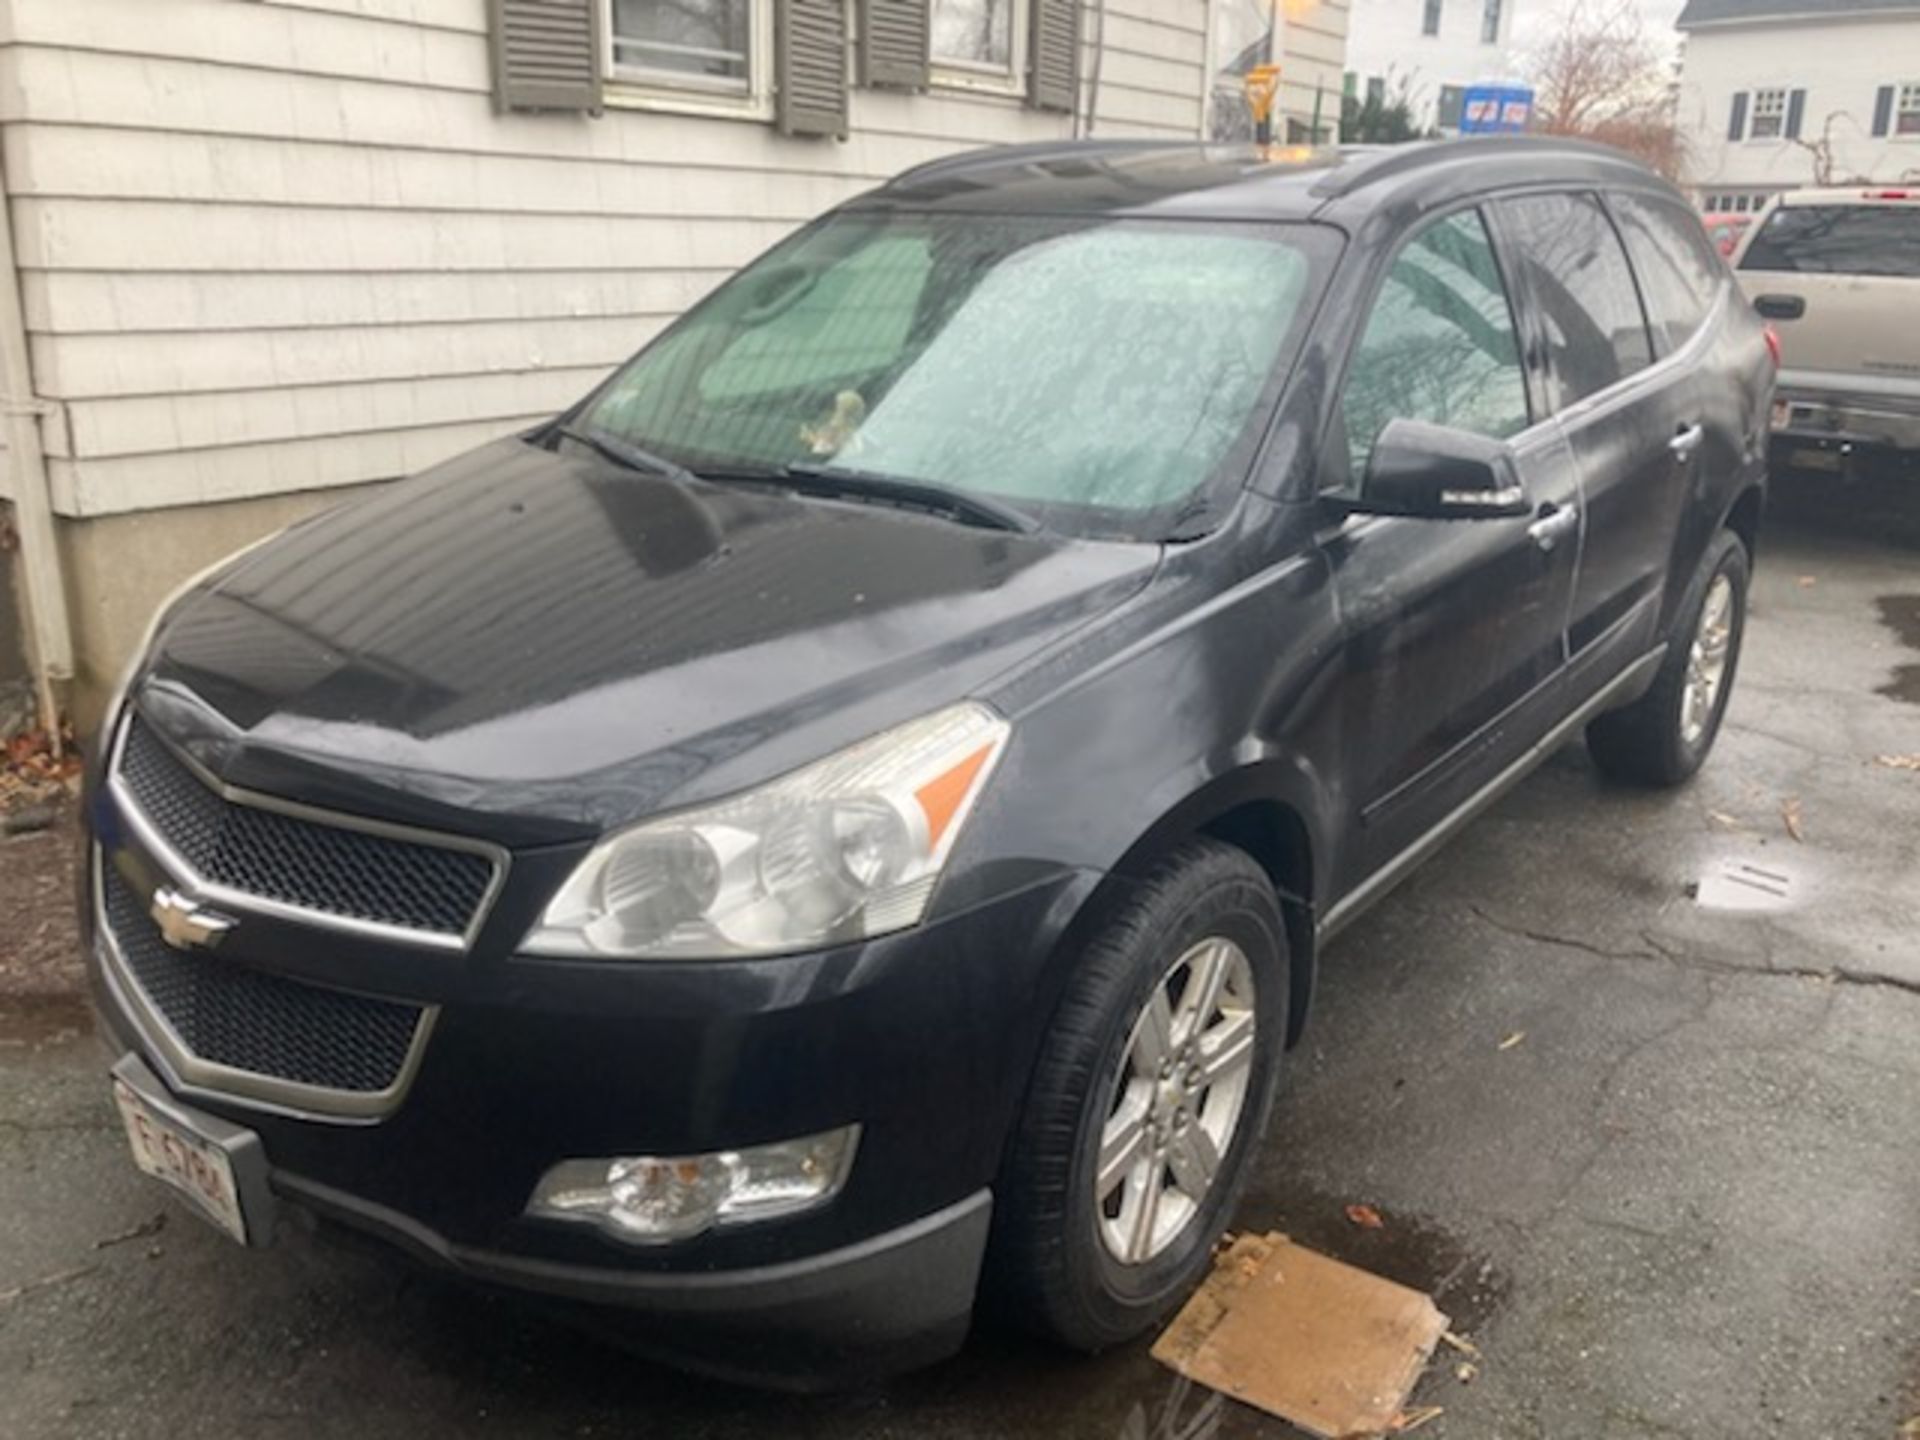 2011 Chevrolet Traverse, V6, All Wheel Drive, Auto Trans, Navigation, Second Row Buckets, 3rd Row Se - Image 6 of 14